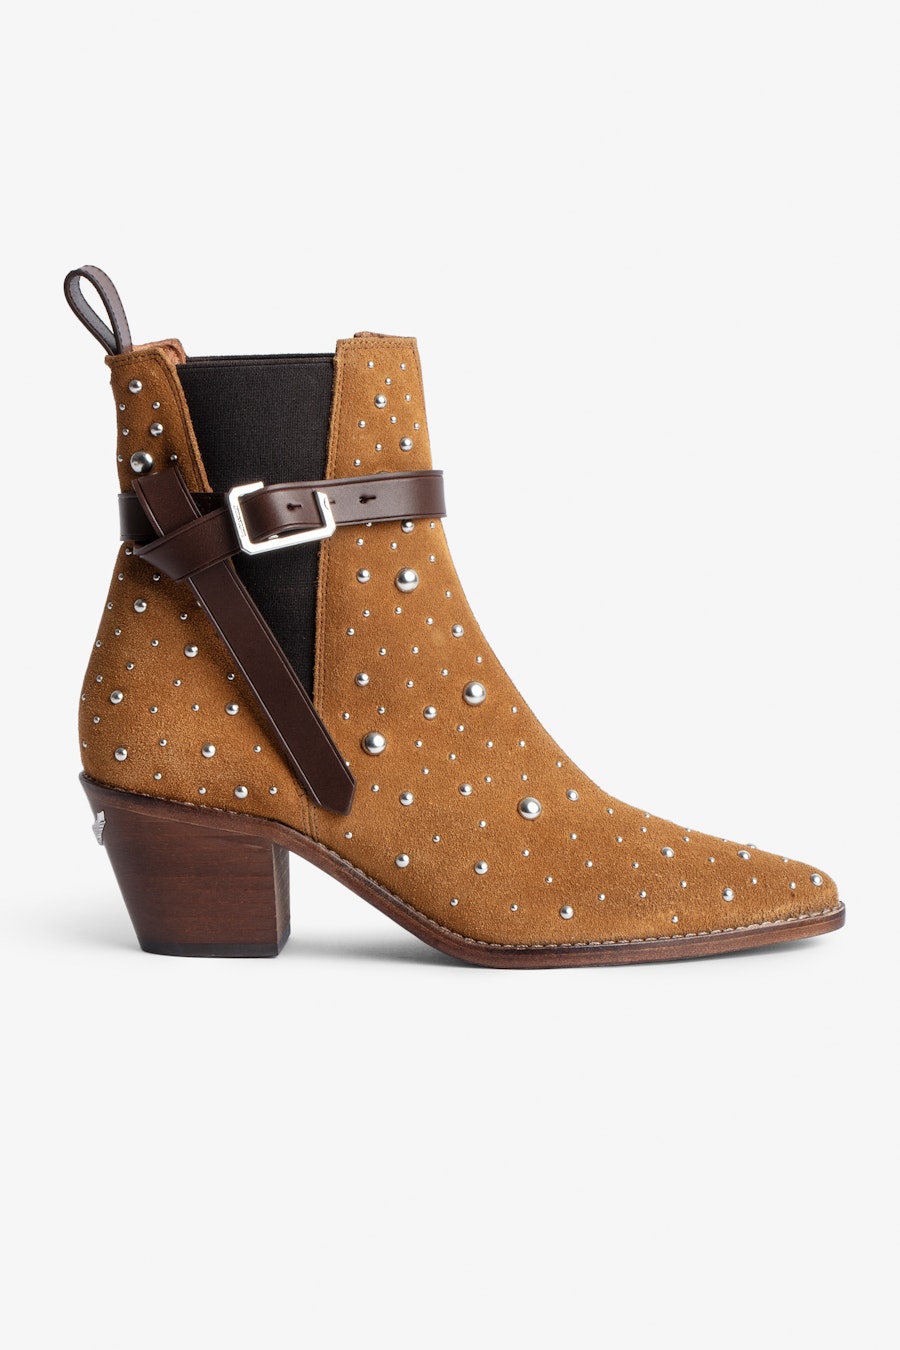 ZADIG&VOLTAIRE Tyler Dream Studs Ankle Boots